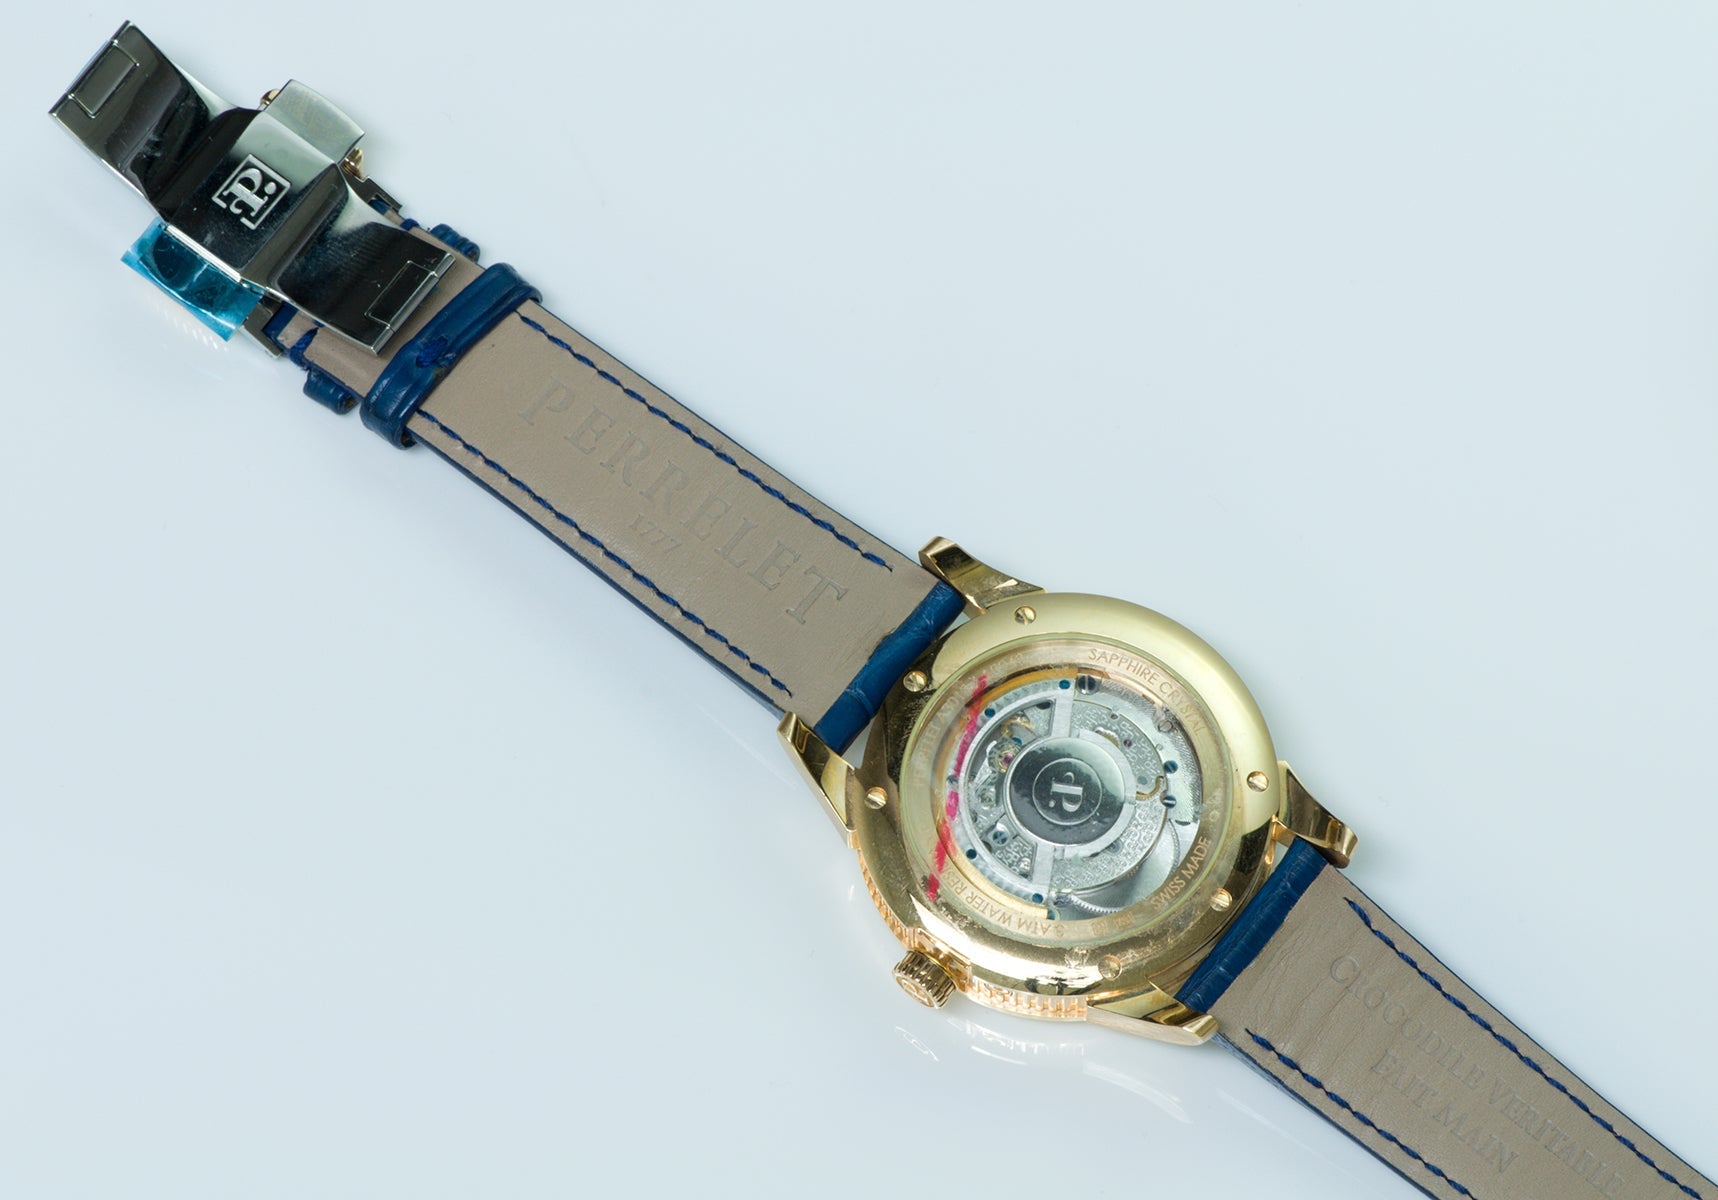 Perrelet Moon Phase Automatic 18K Gold Watch